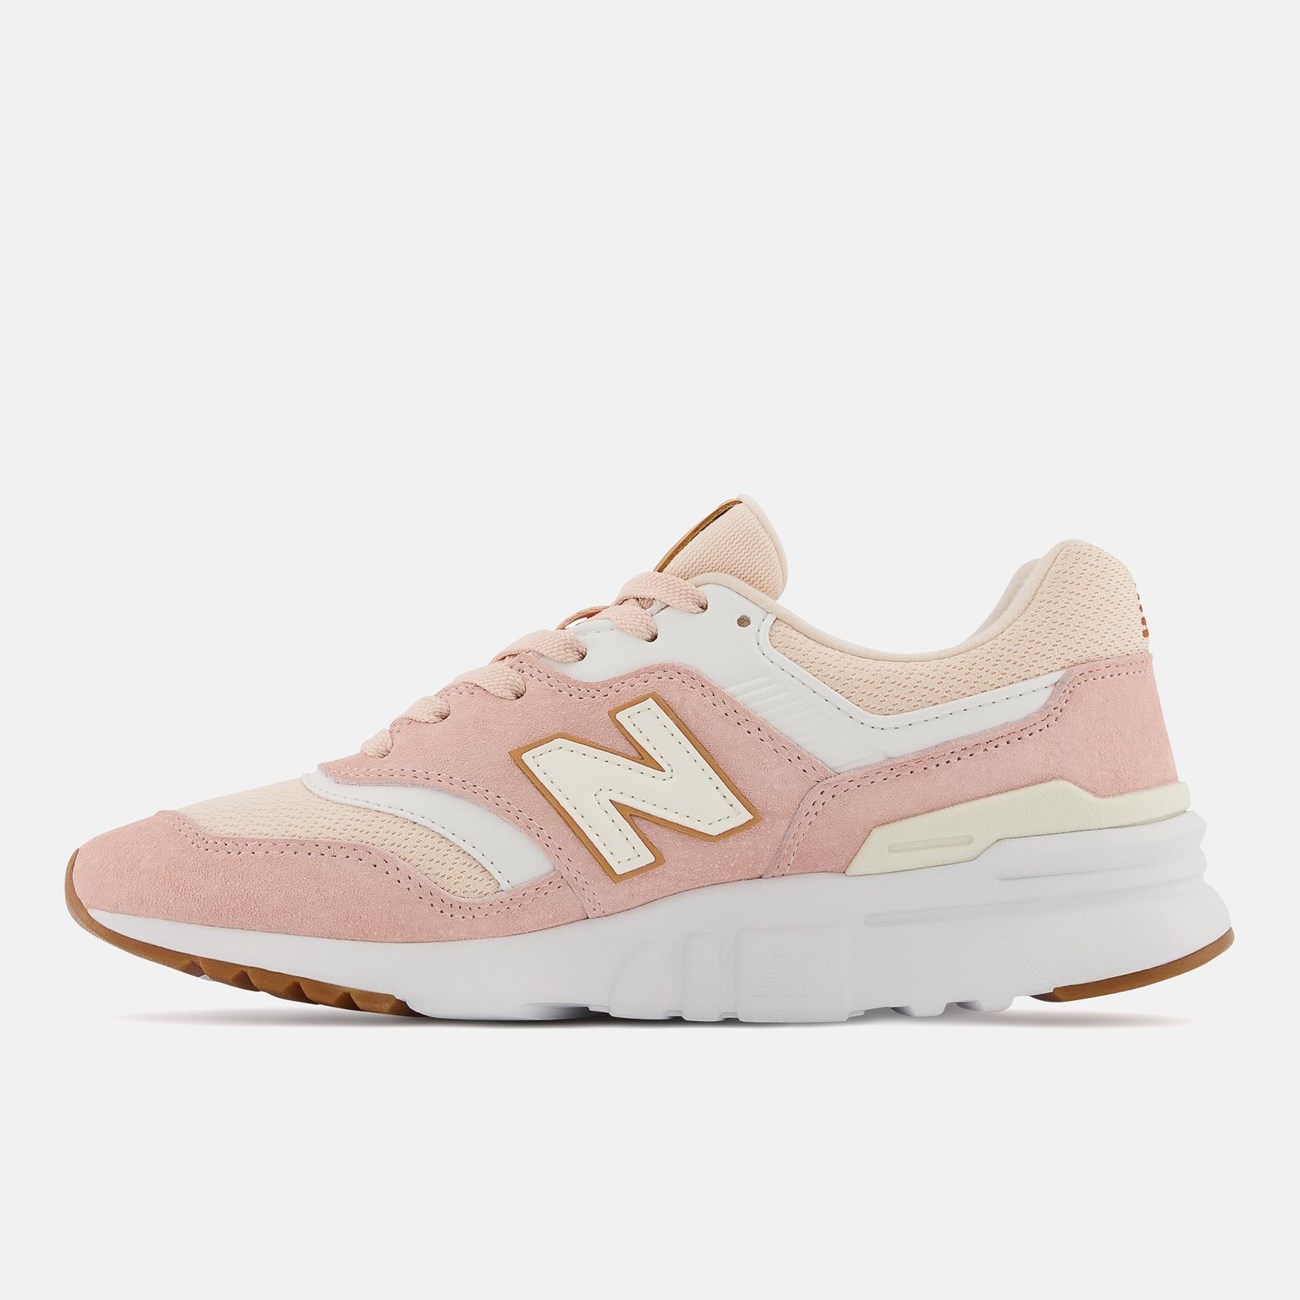 NEW BALANCE Γυναικεία Sneakers 997H CW997-HLV - The Athlete's Foot